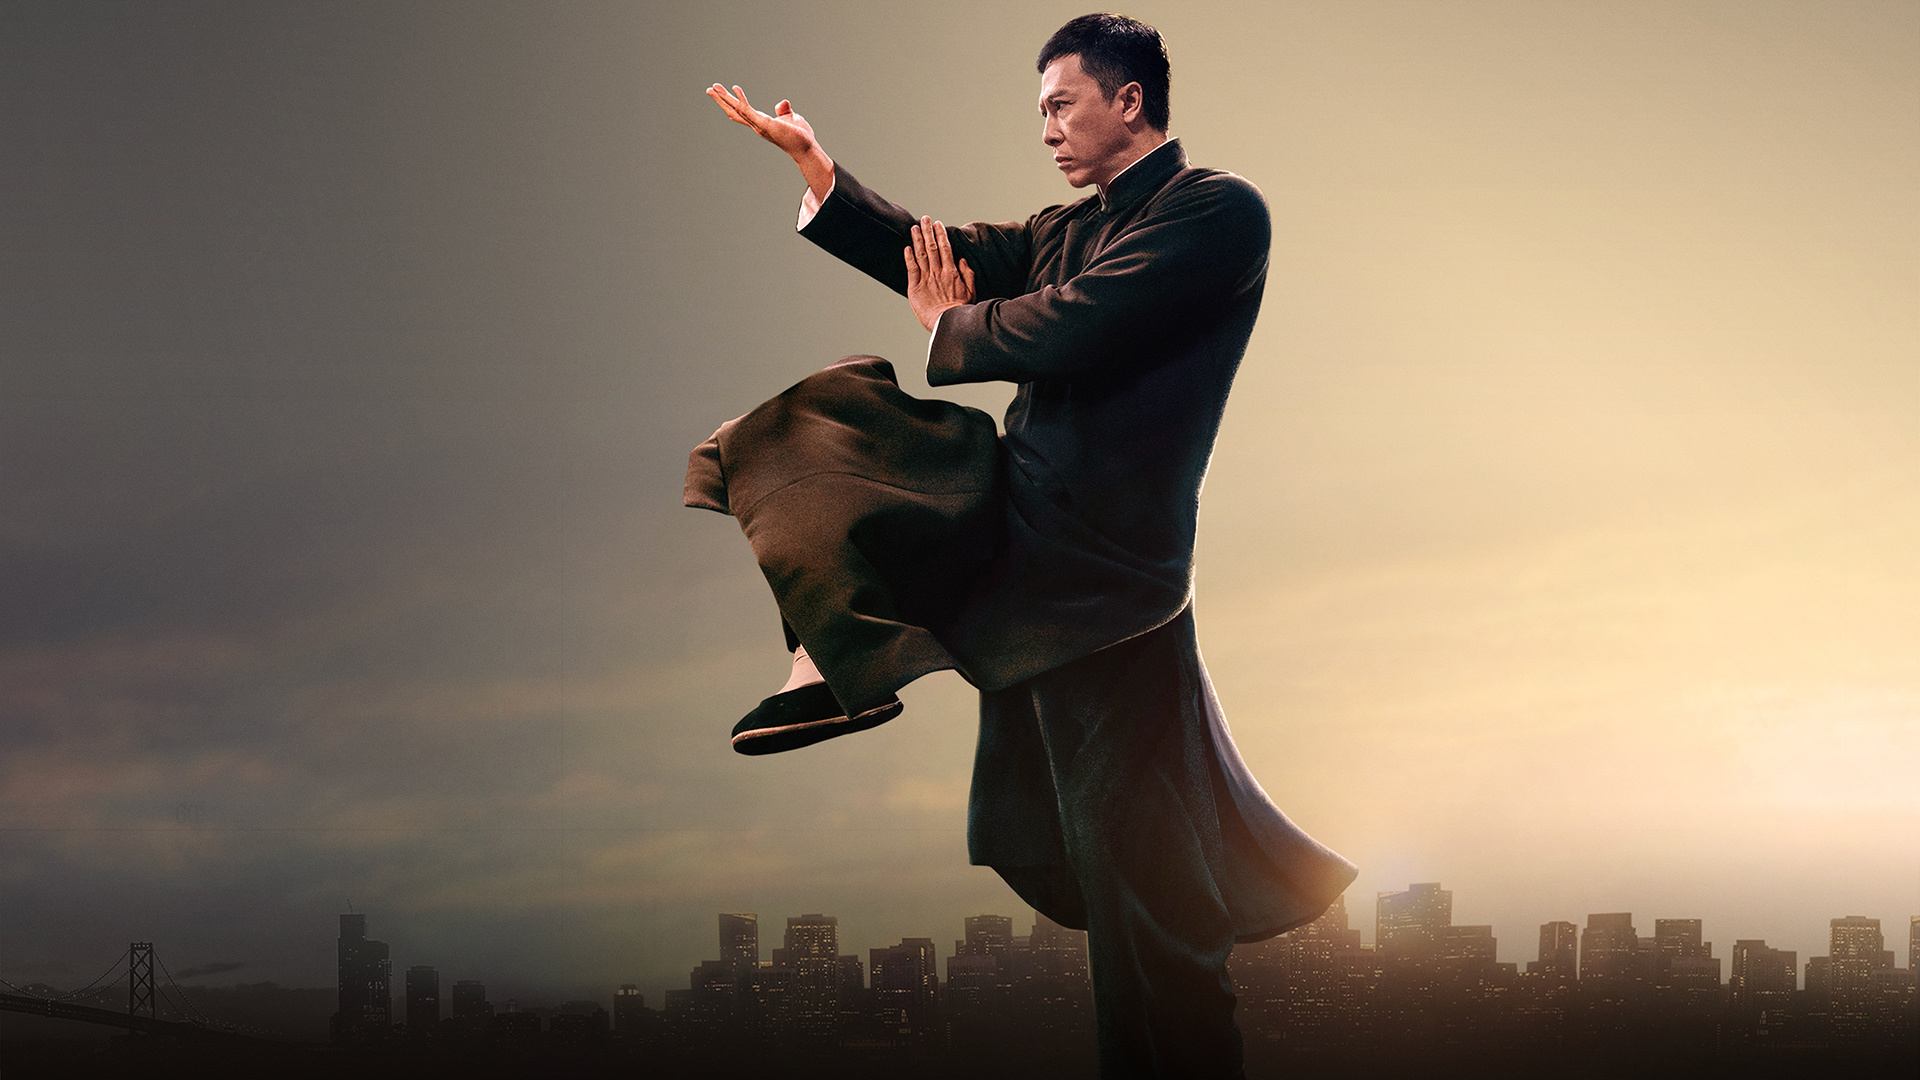 Ip Man: Directed by Yuen Woo-ping, stars Tony Jaa, Dave Bautista and Michelle Yeoh. 1920x1080 Full HD Background.